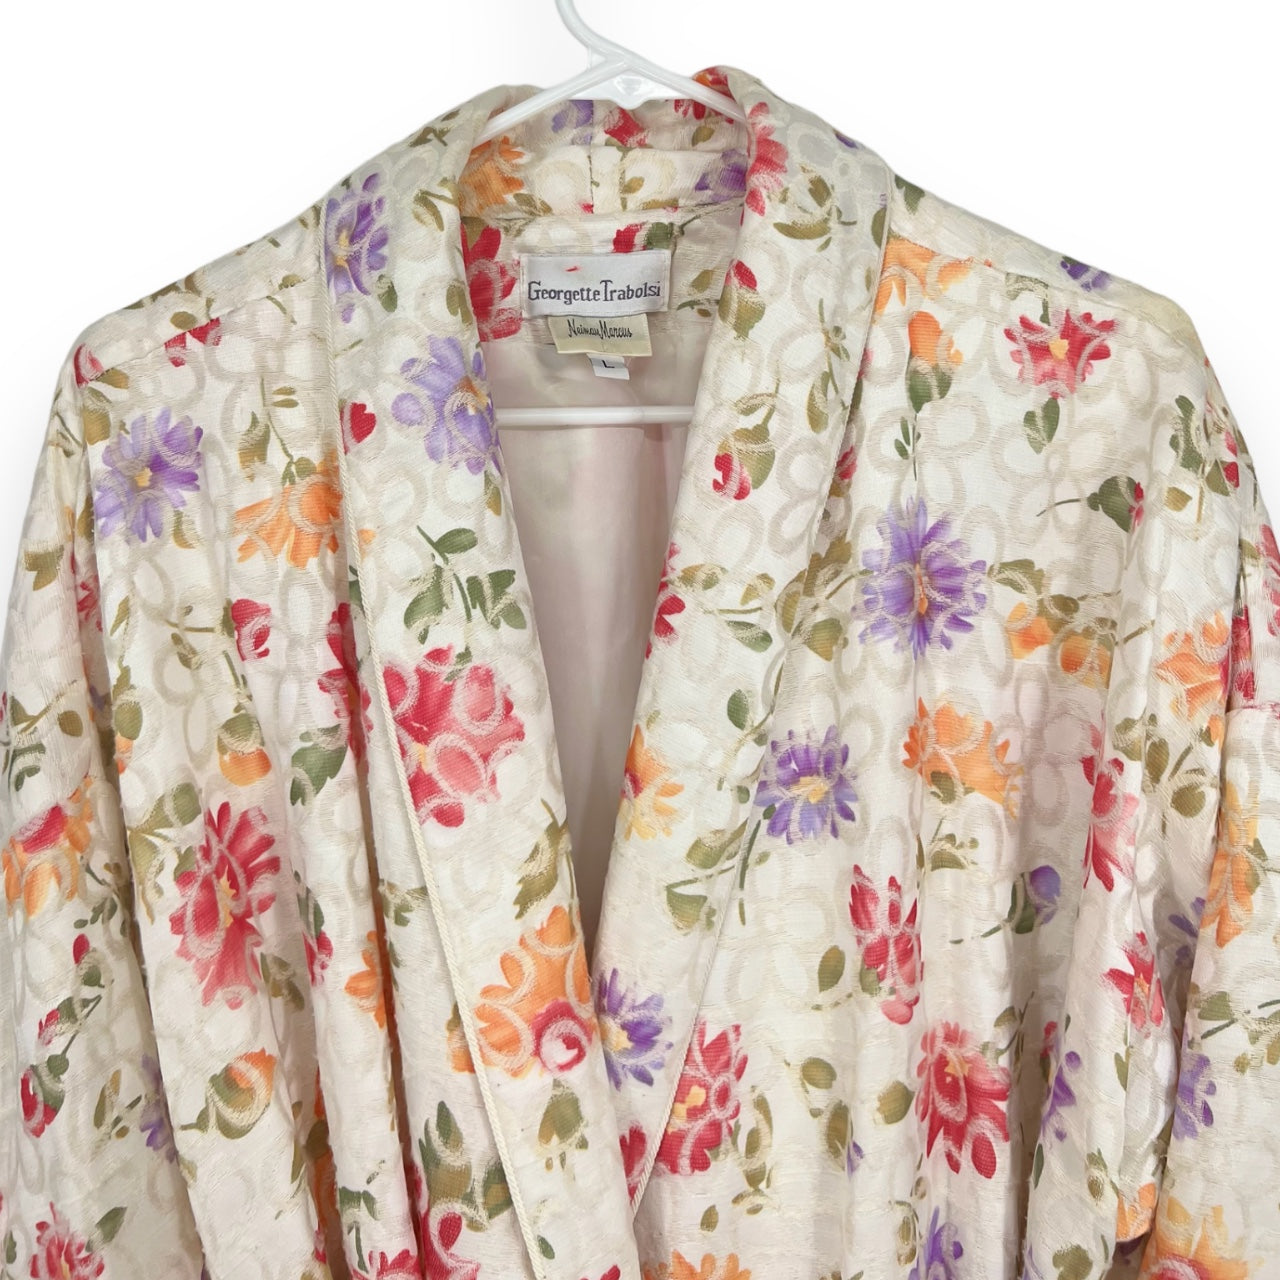 Vintage Georgette Trabolsi Neiman Marcus Ivory Floral Embroidered Duster Robe Coat Sz: L